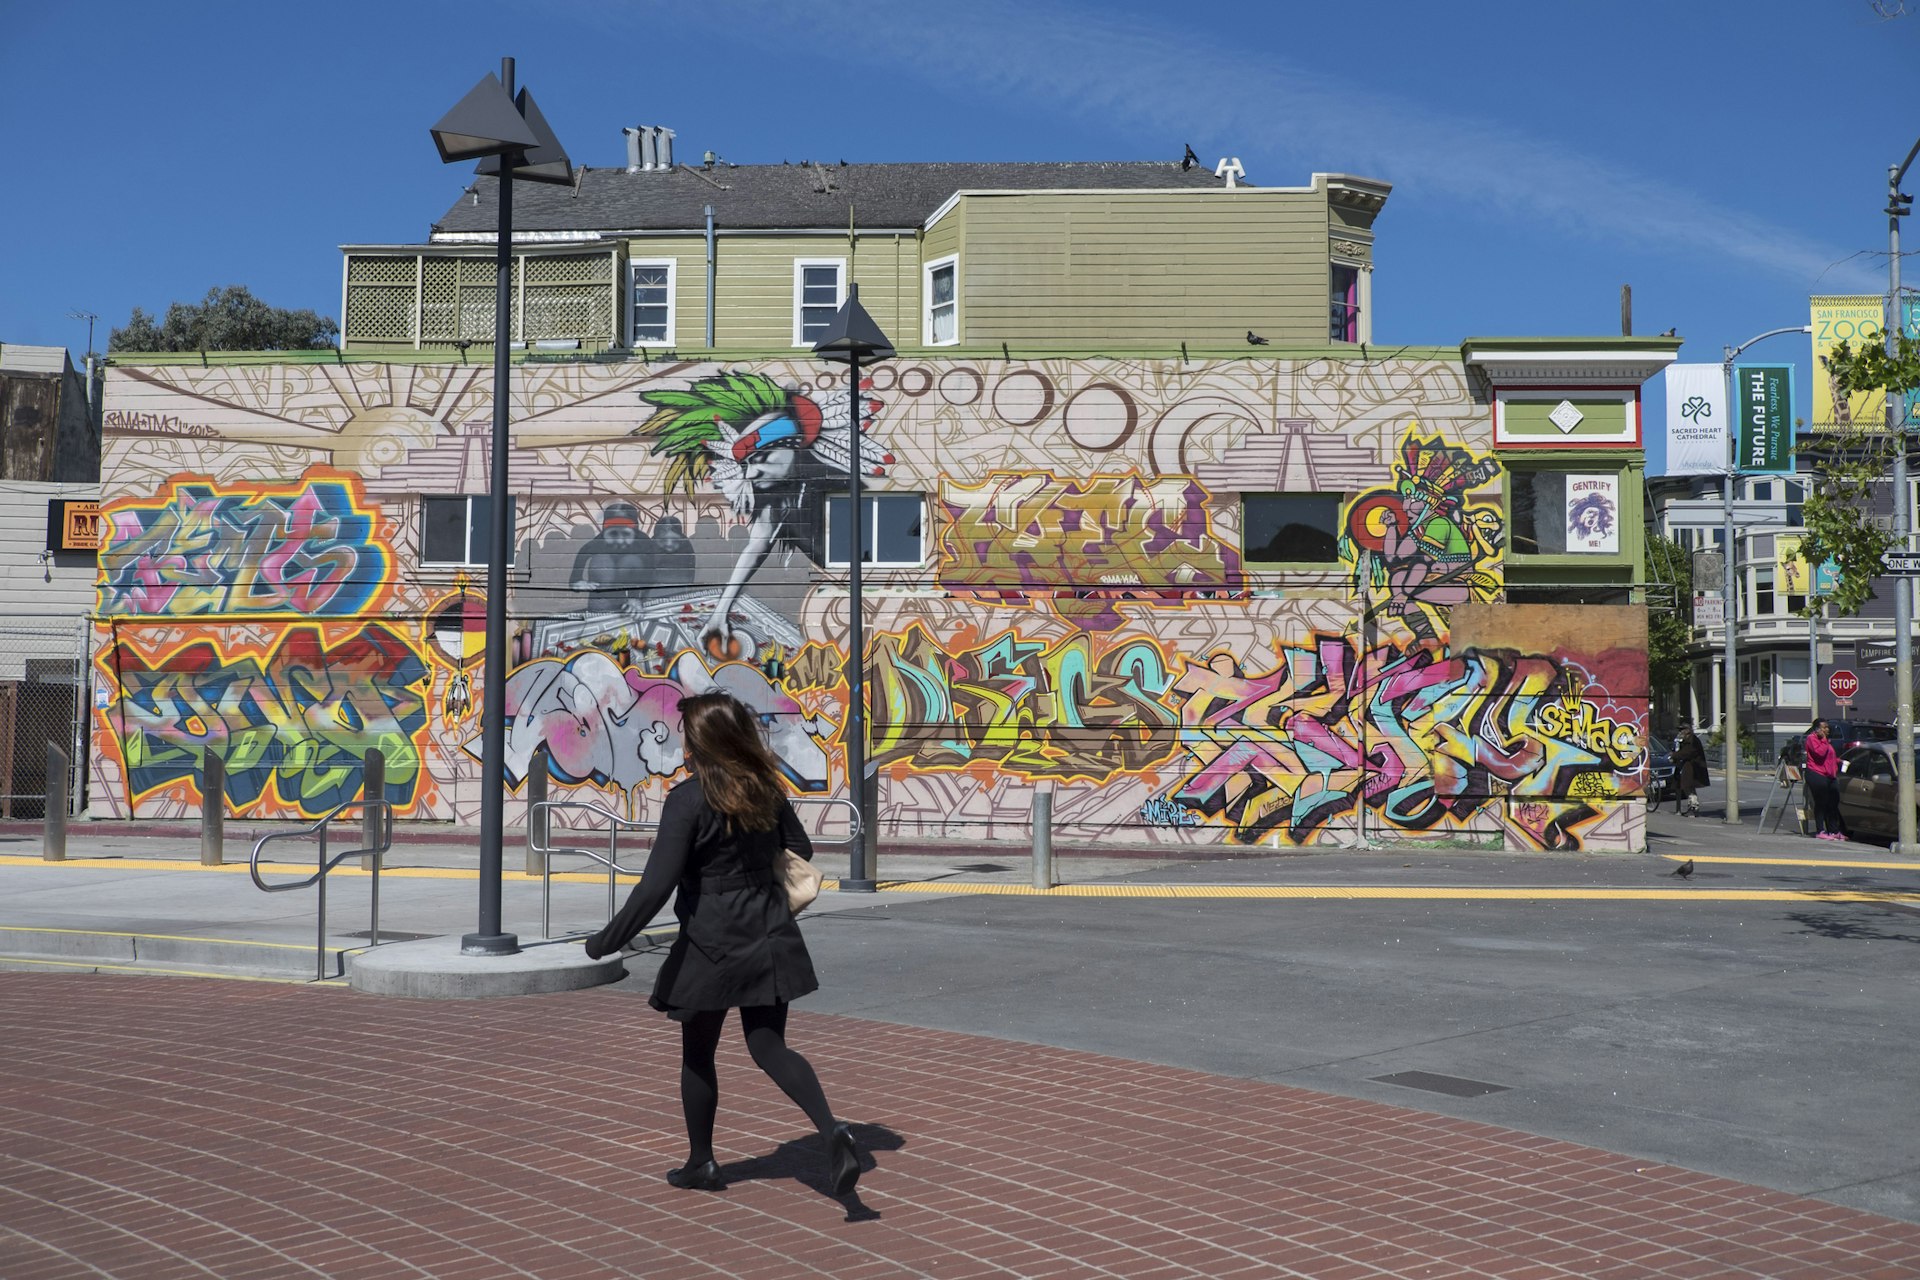 A woman in a black coat walks past a vibrant street mural in Bernal Heights, San Francisco.